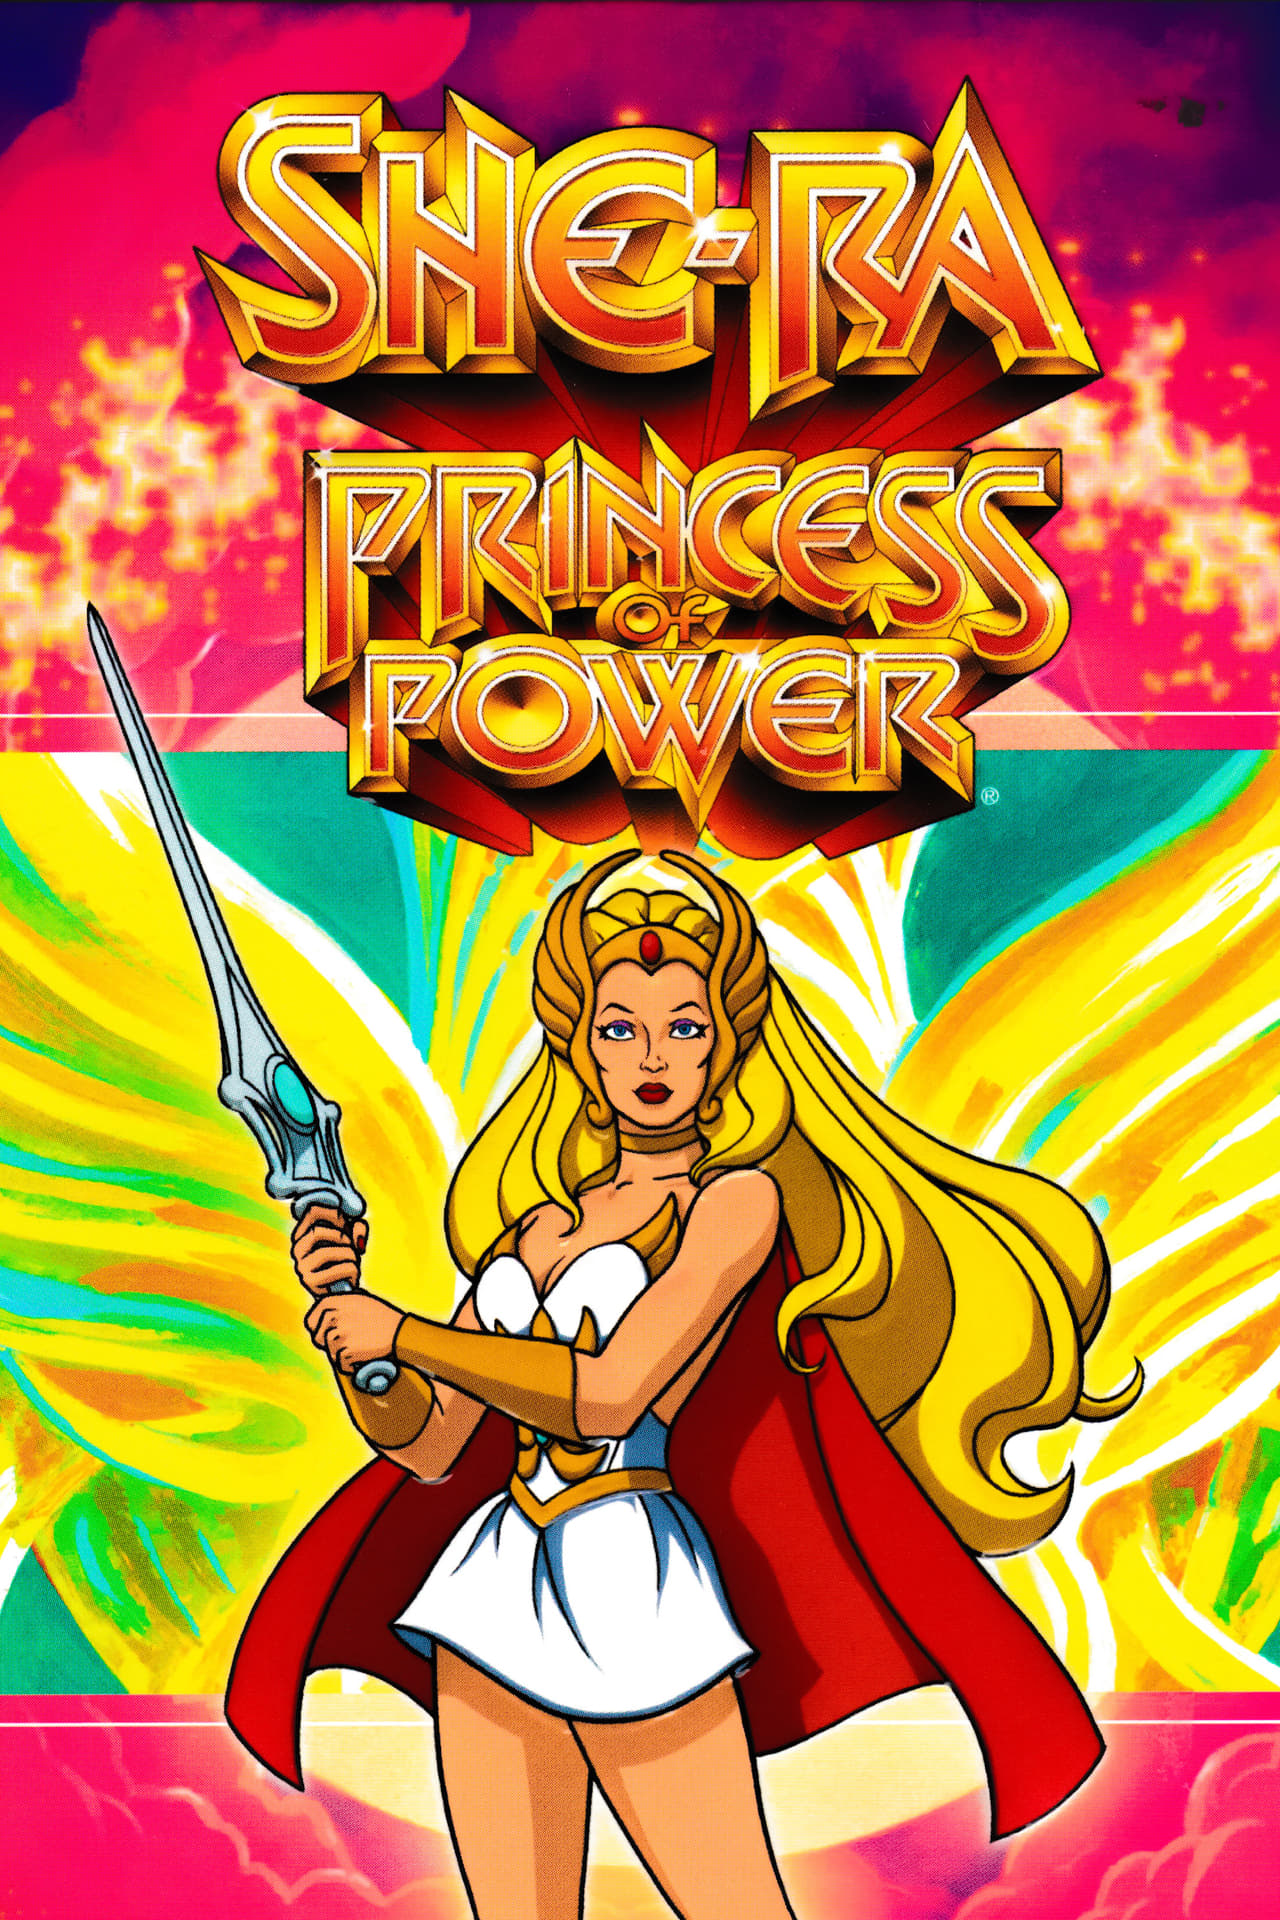 She-Ra And The Princesses Of Power S3 Poster Announces 